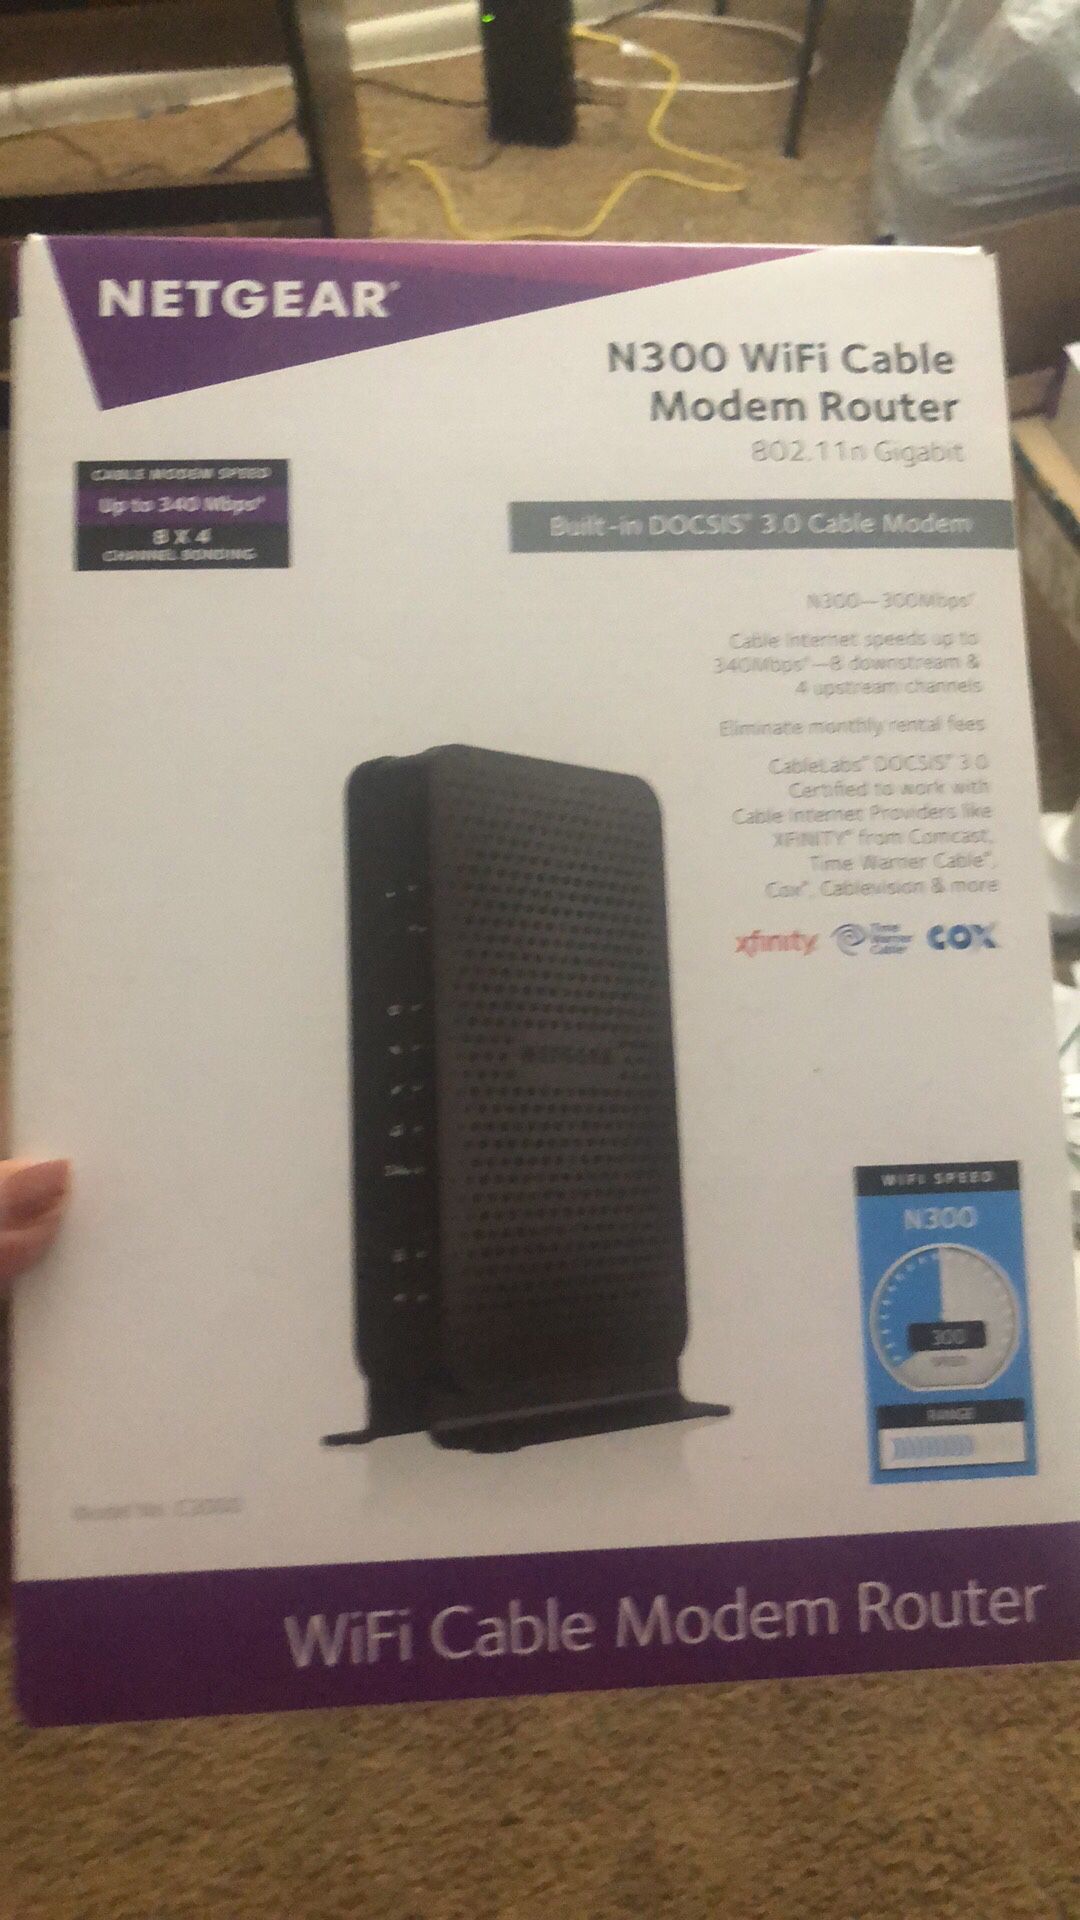 NetgeAr N300 WiFi and cable modem router